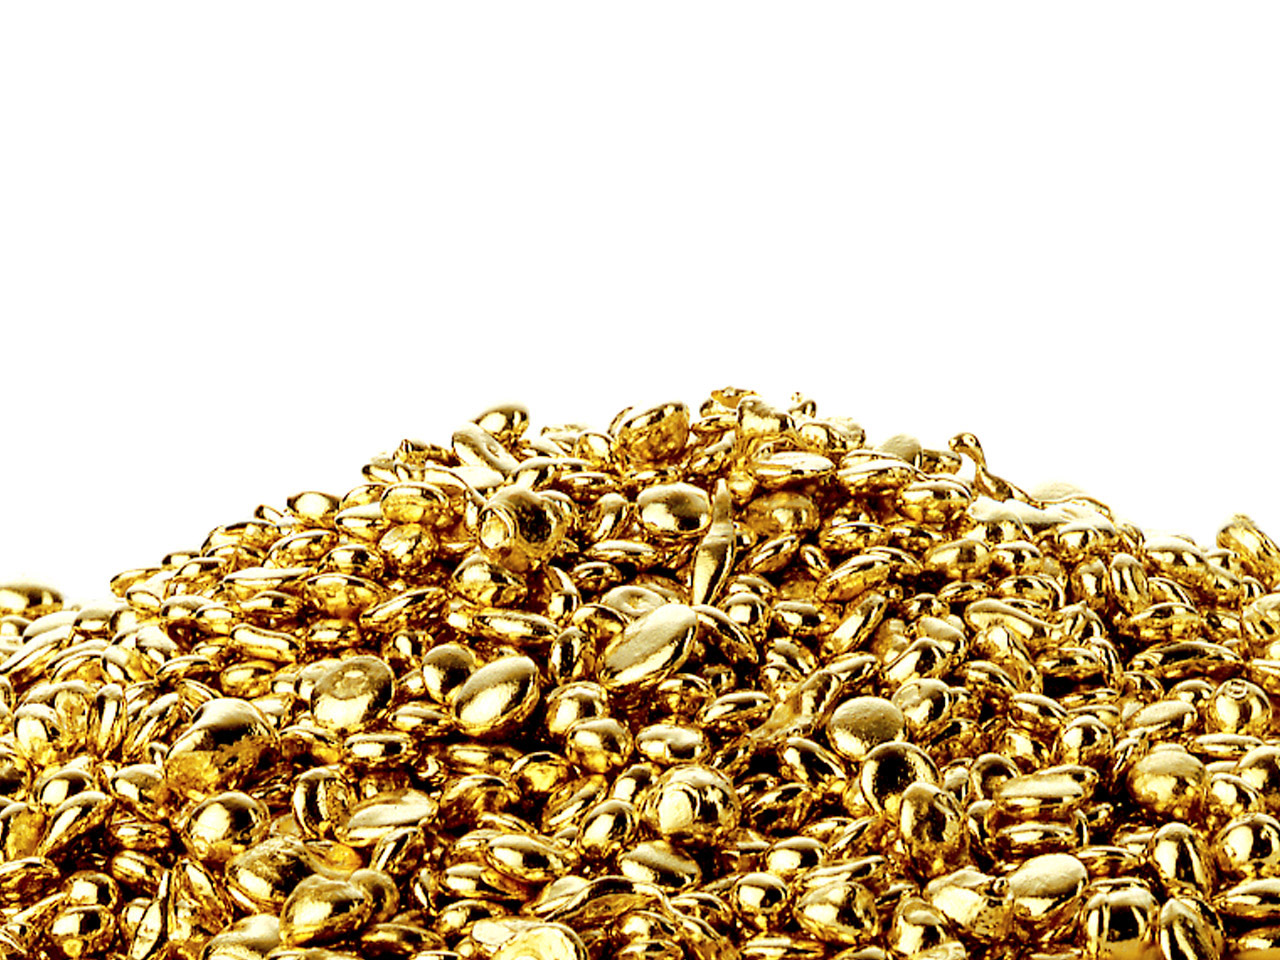 Fine Gold Grain Minimum 99.96% Au, 100% Recycled Gold Questions & Answers